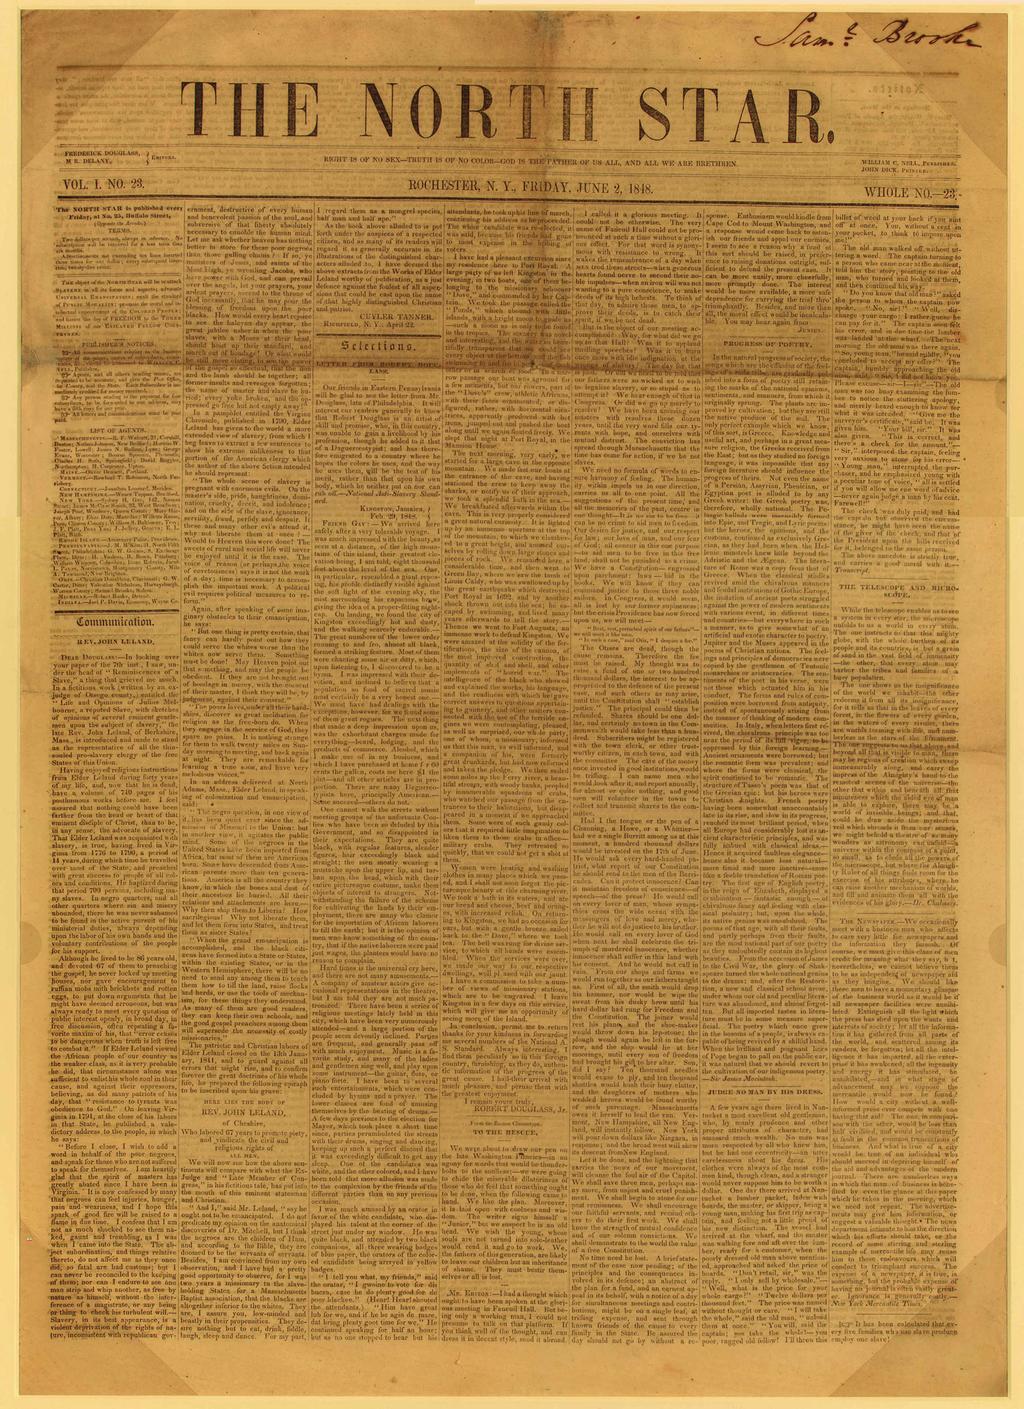 Despite the failure of earlier African American newspapers, Douglass founded the North Star in December 1847.